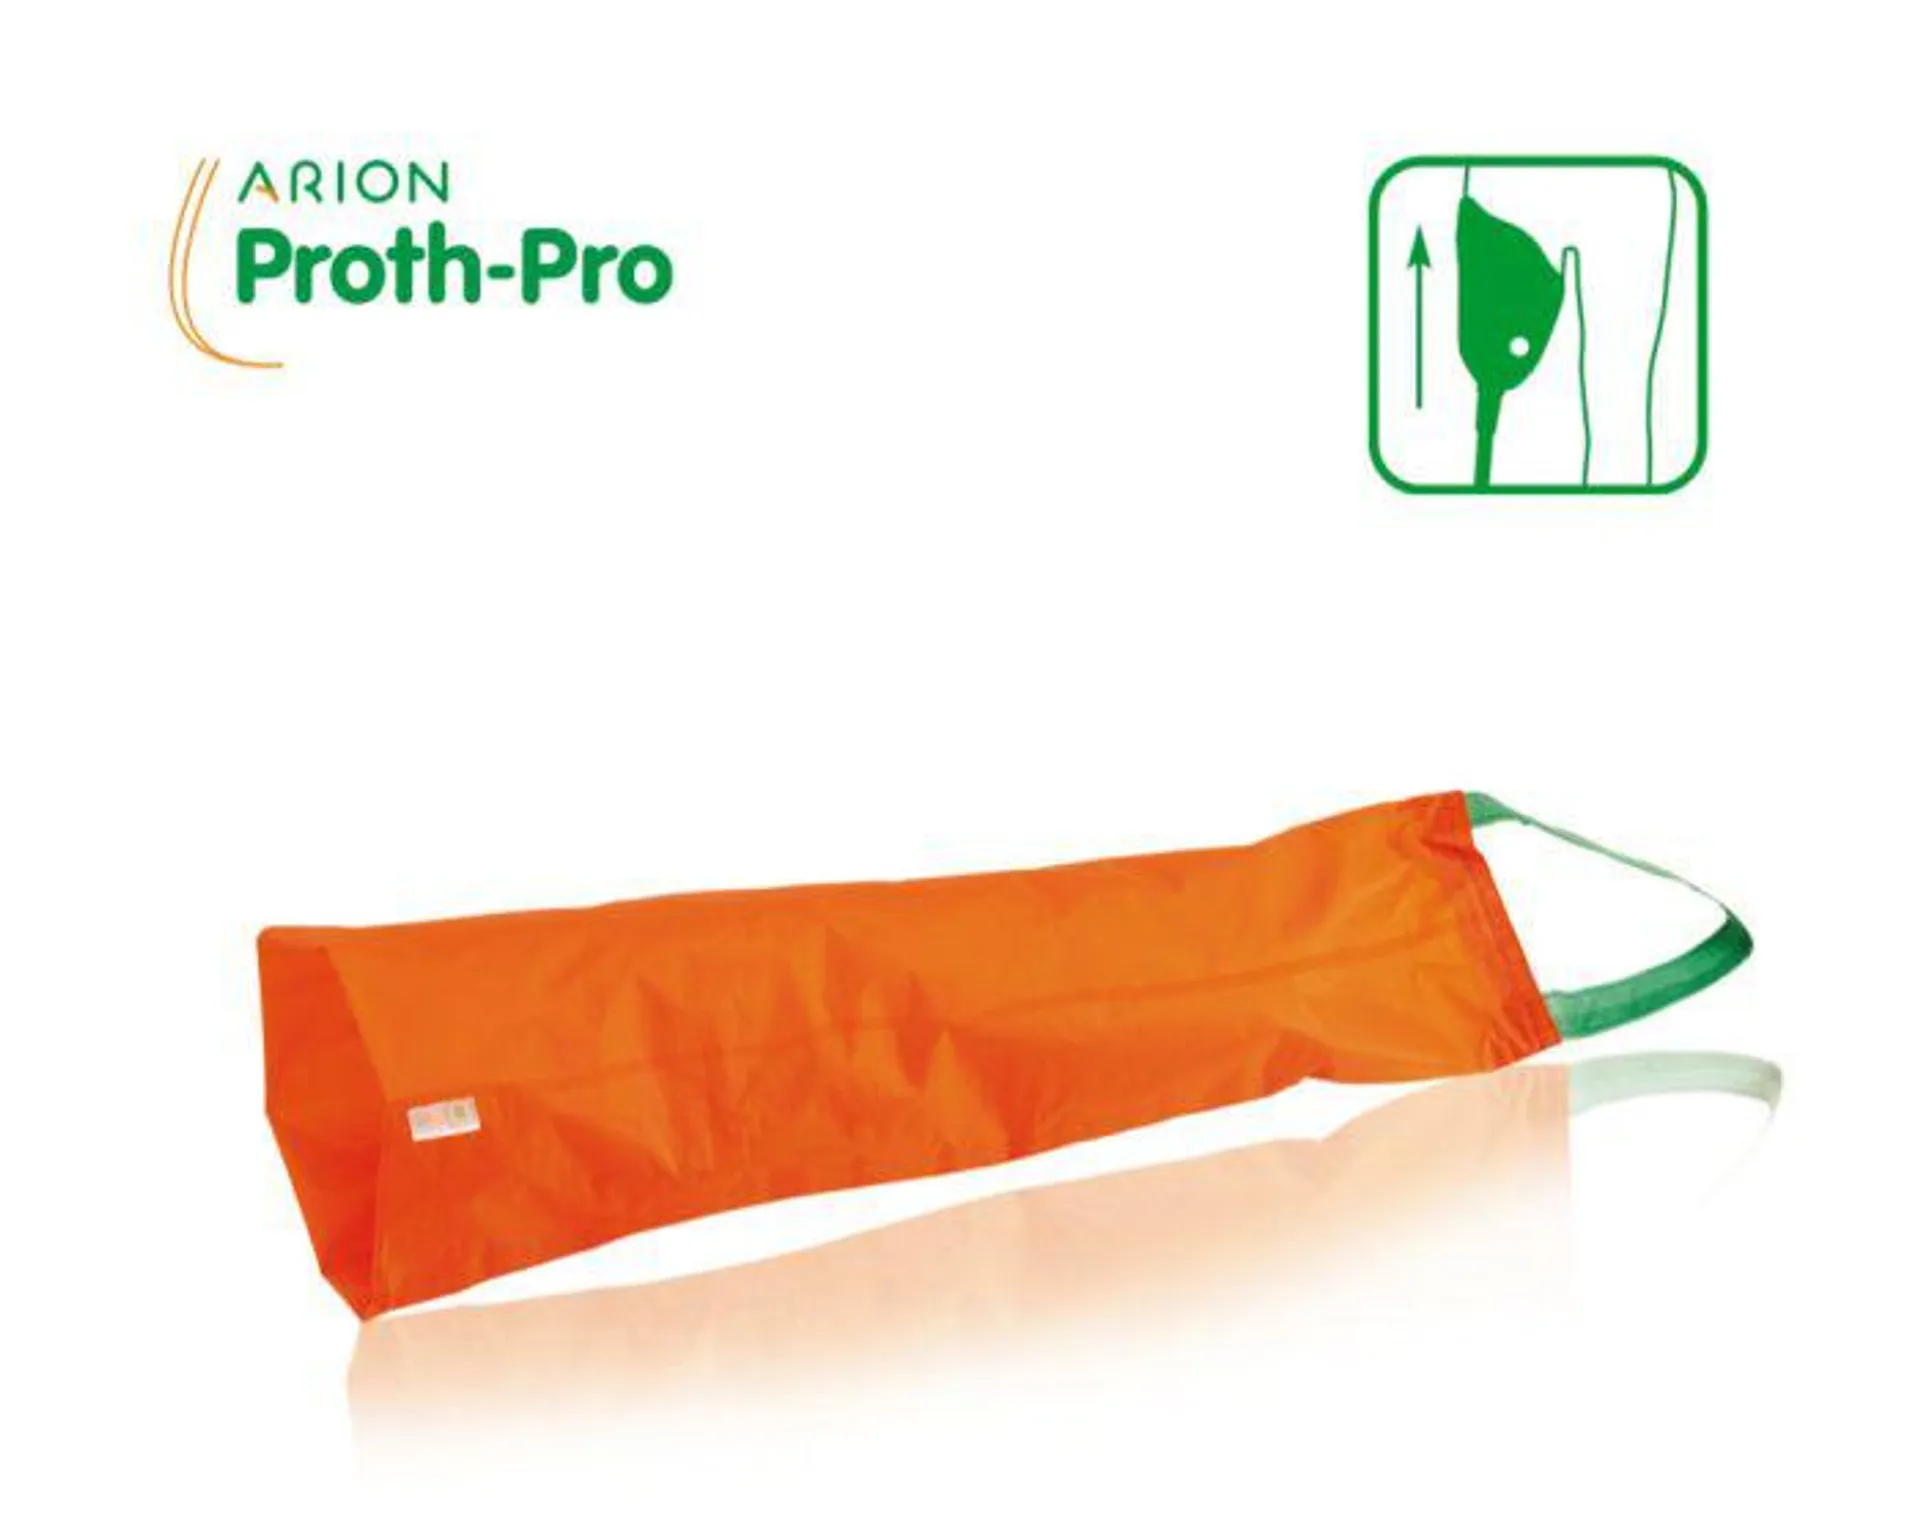 ARION Proth-Pro